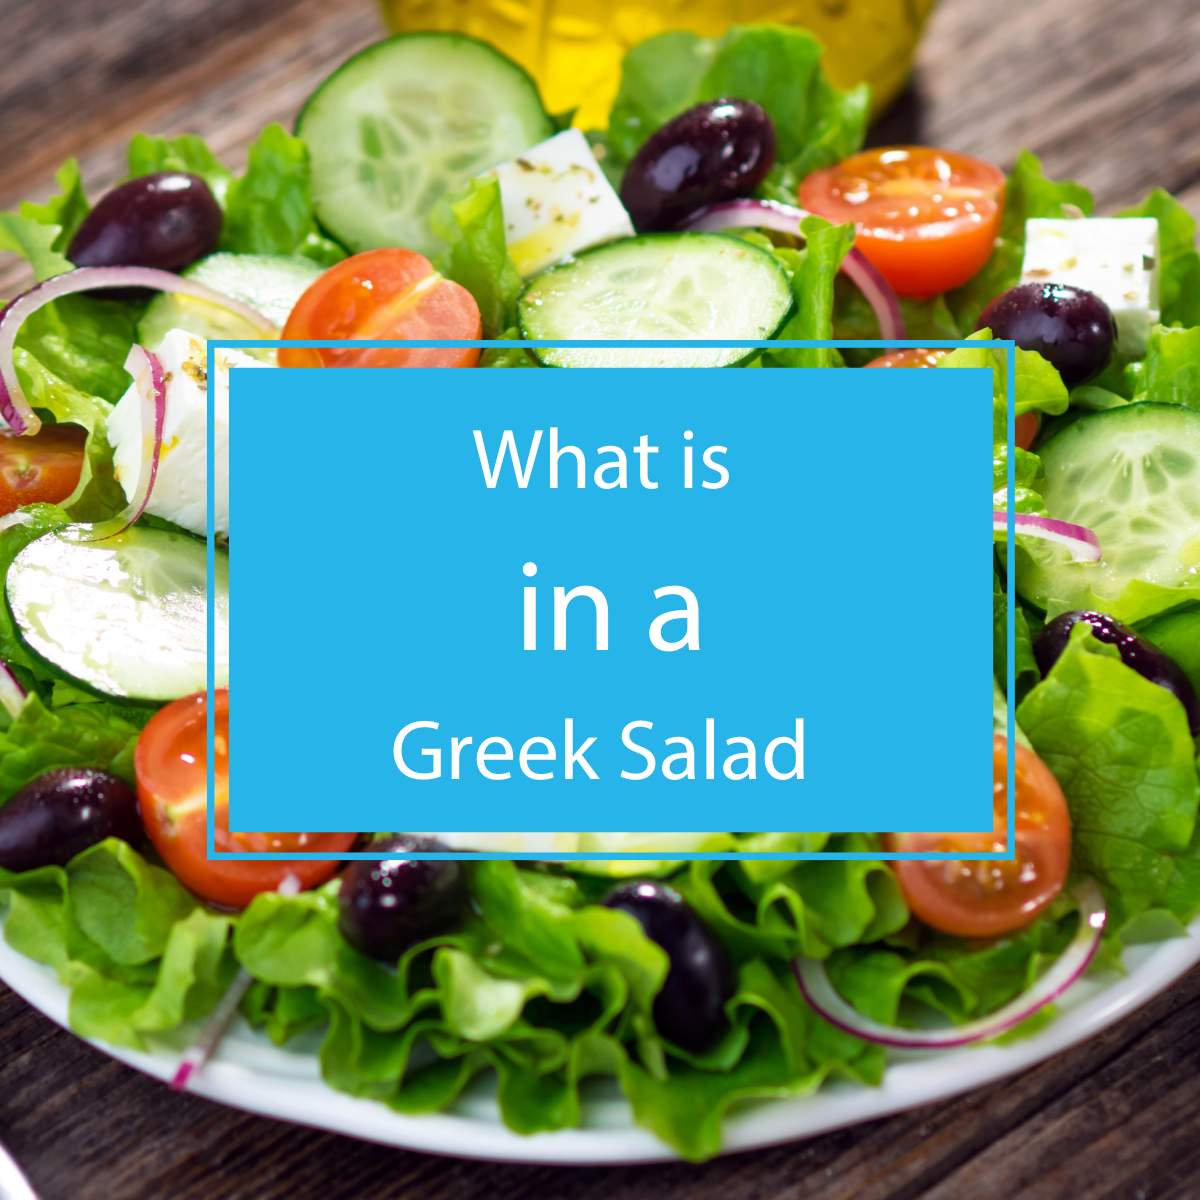 What is in a Greek Salad